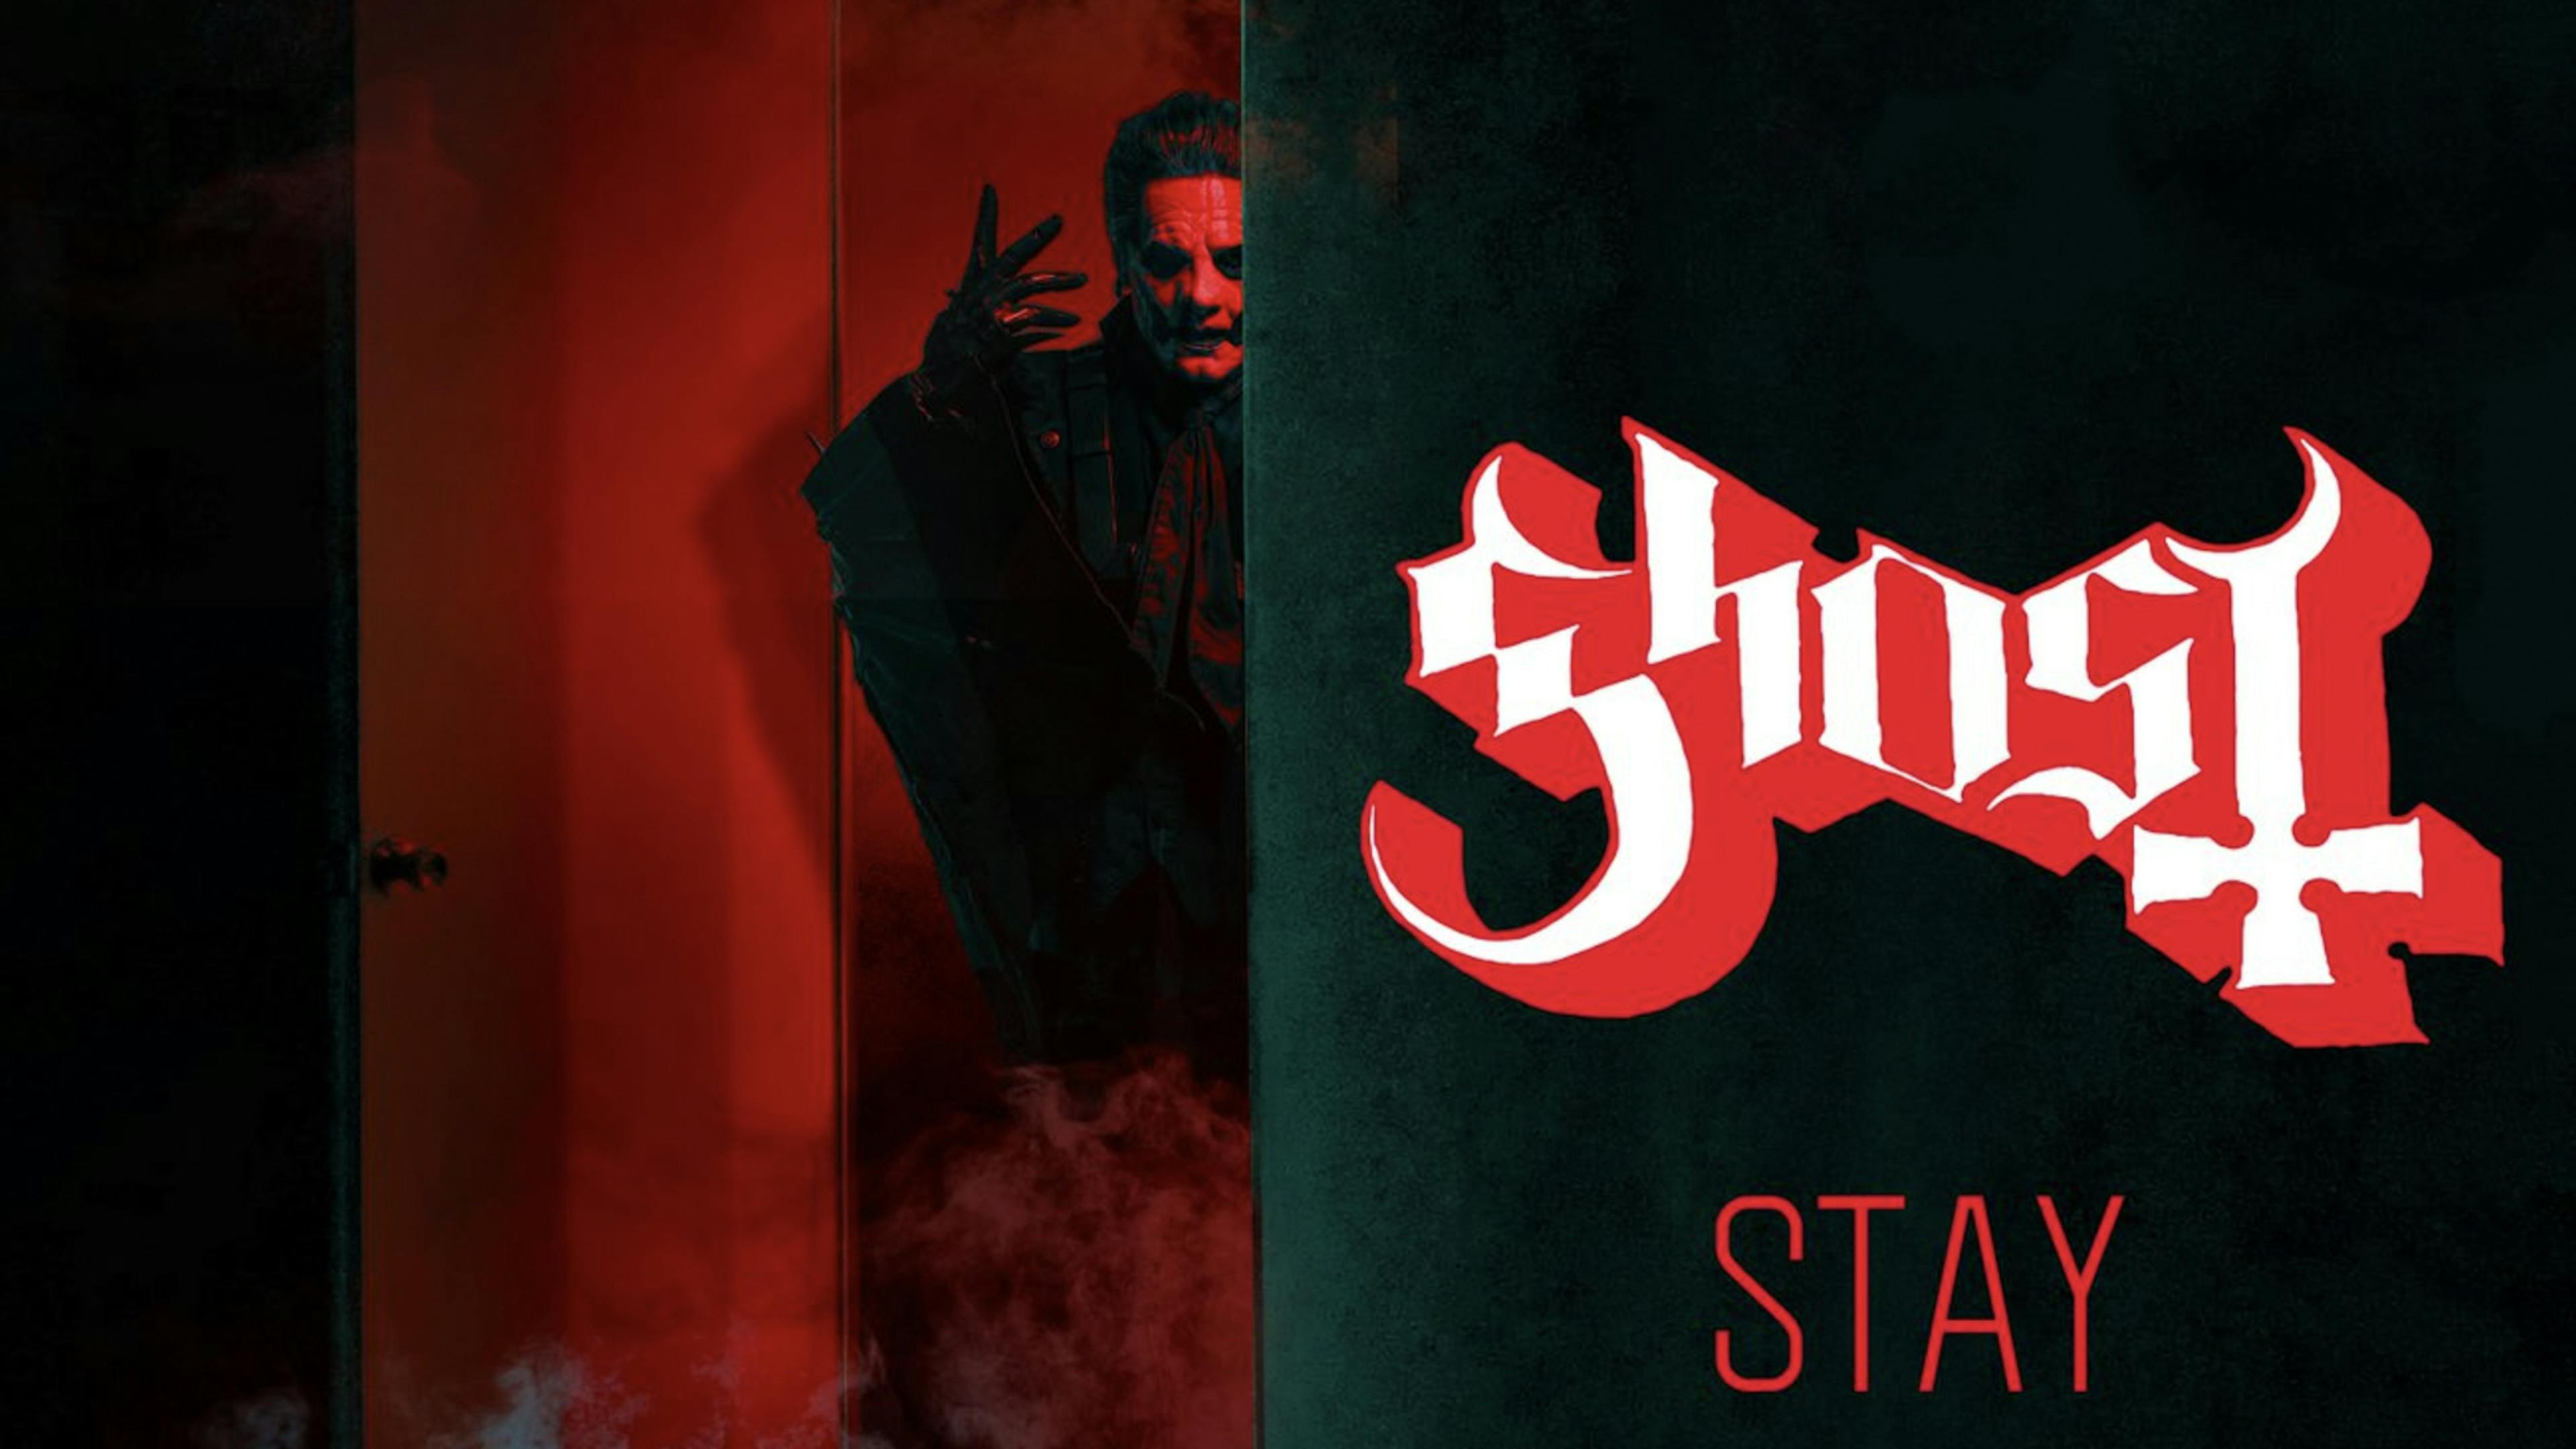 Ghost have covered Stay for Insidious: The Red Door